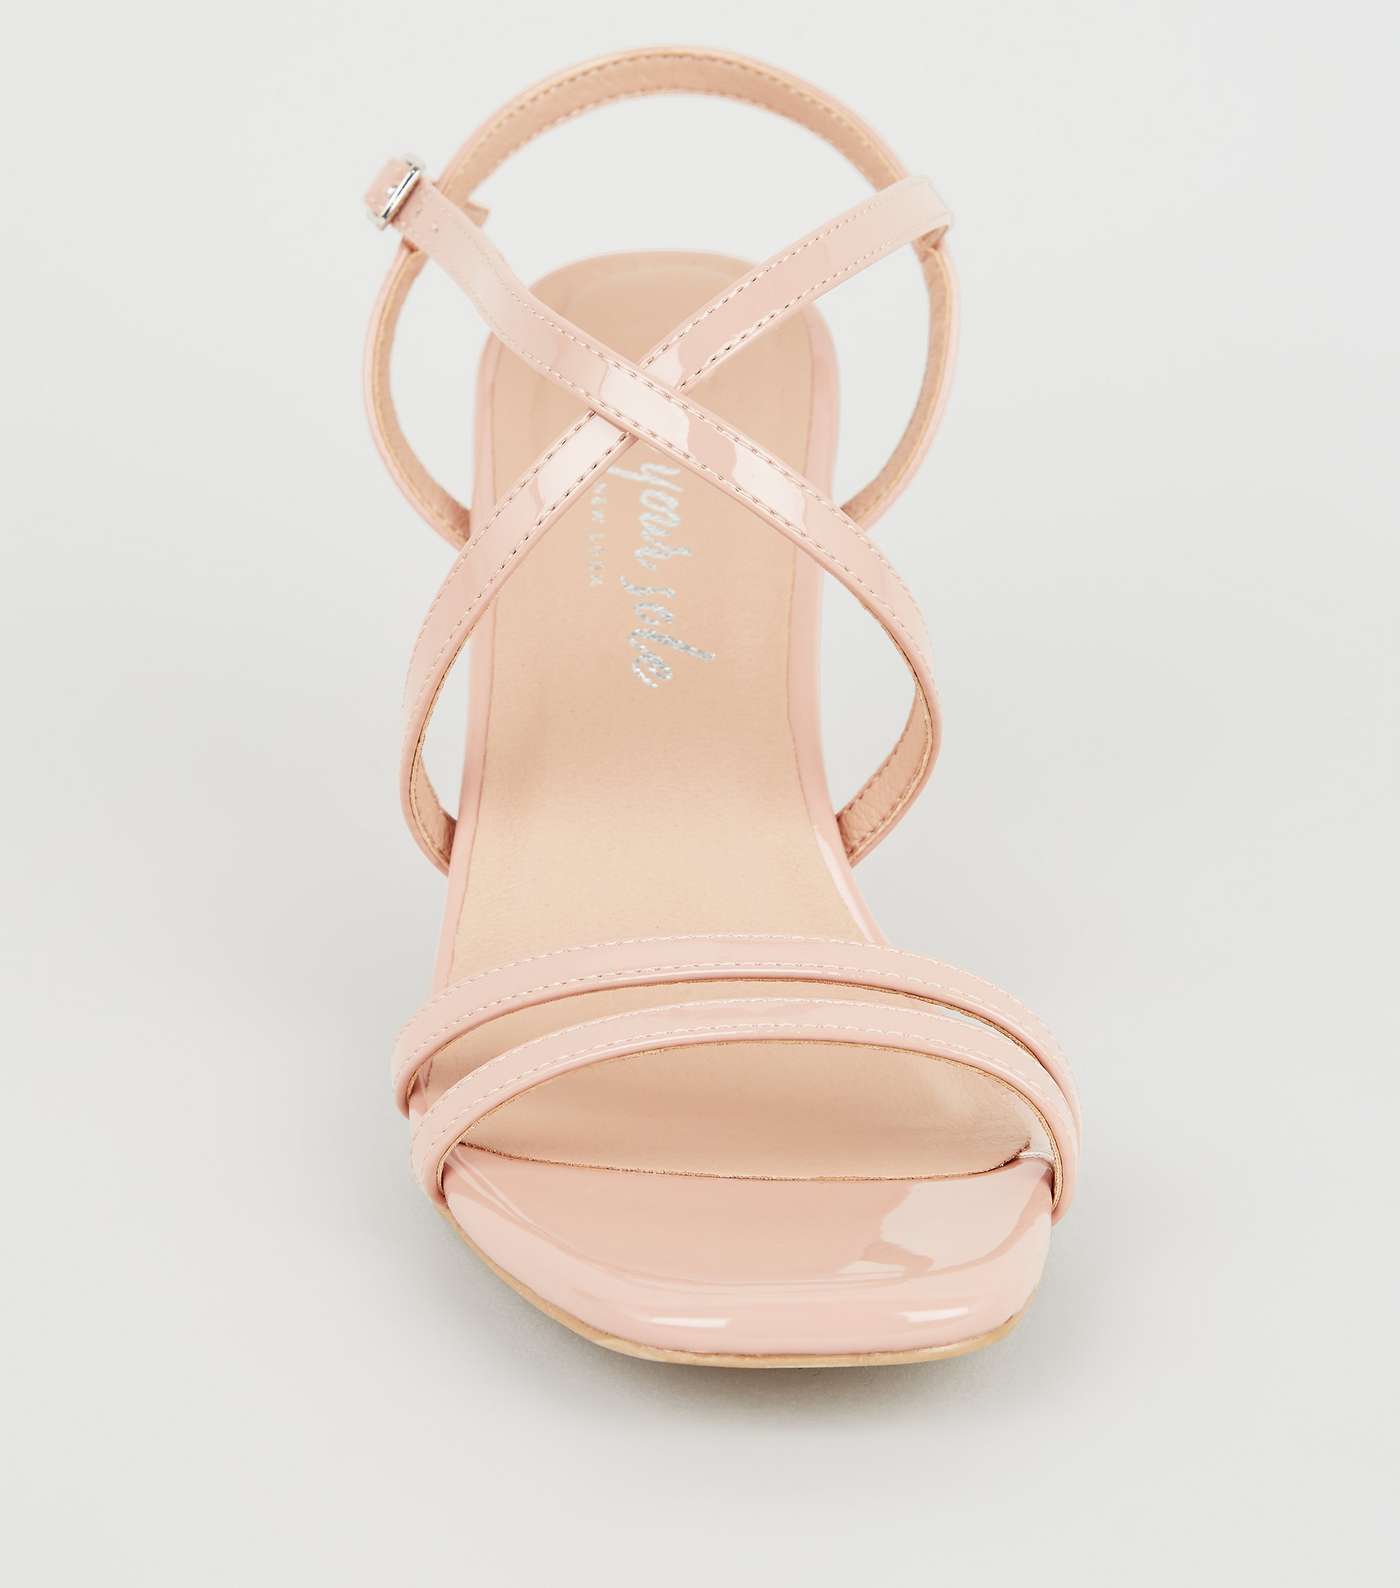 Pale Pink Patent Strappy Stiletto Sandals Image 4